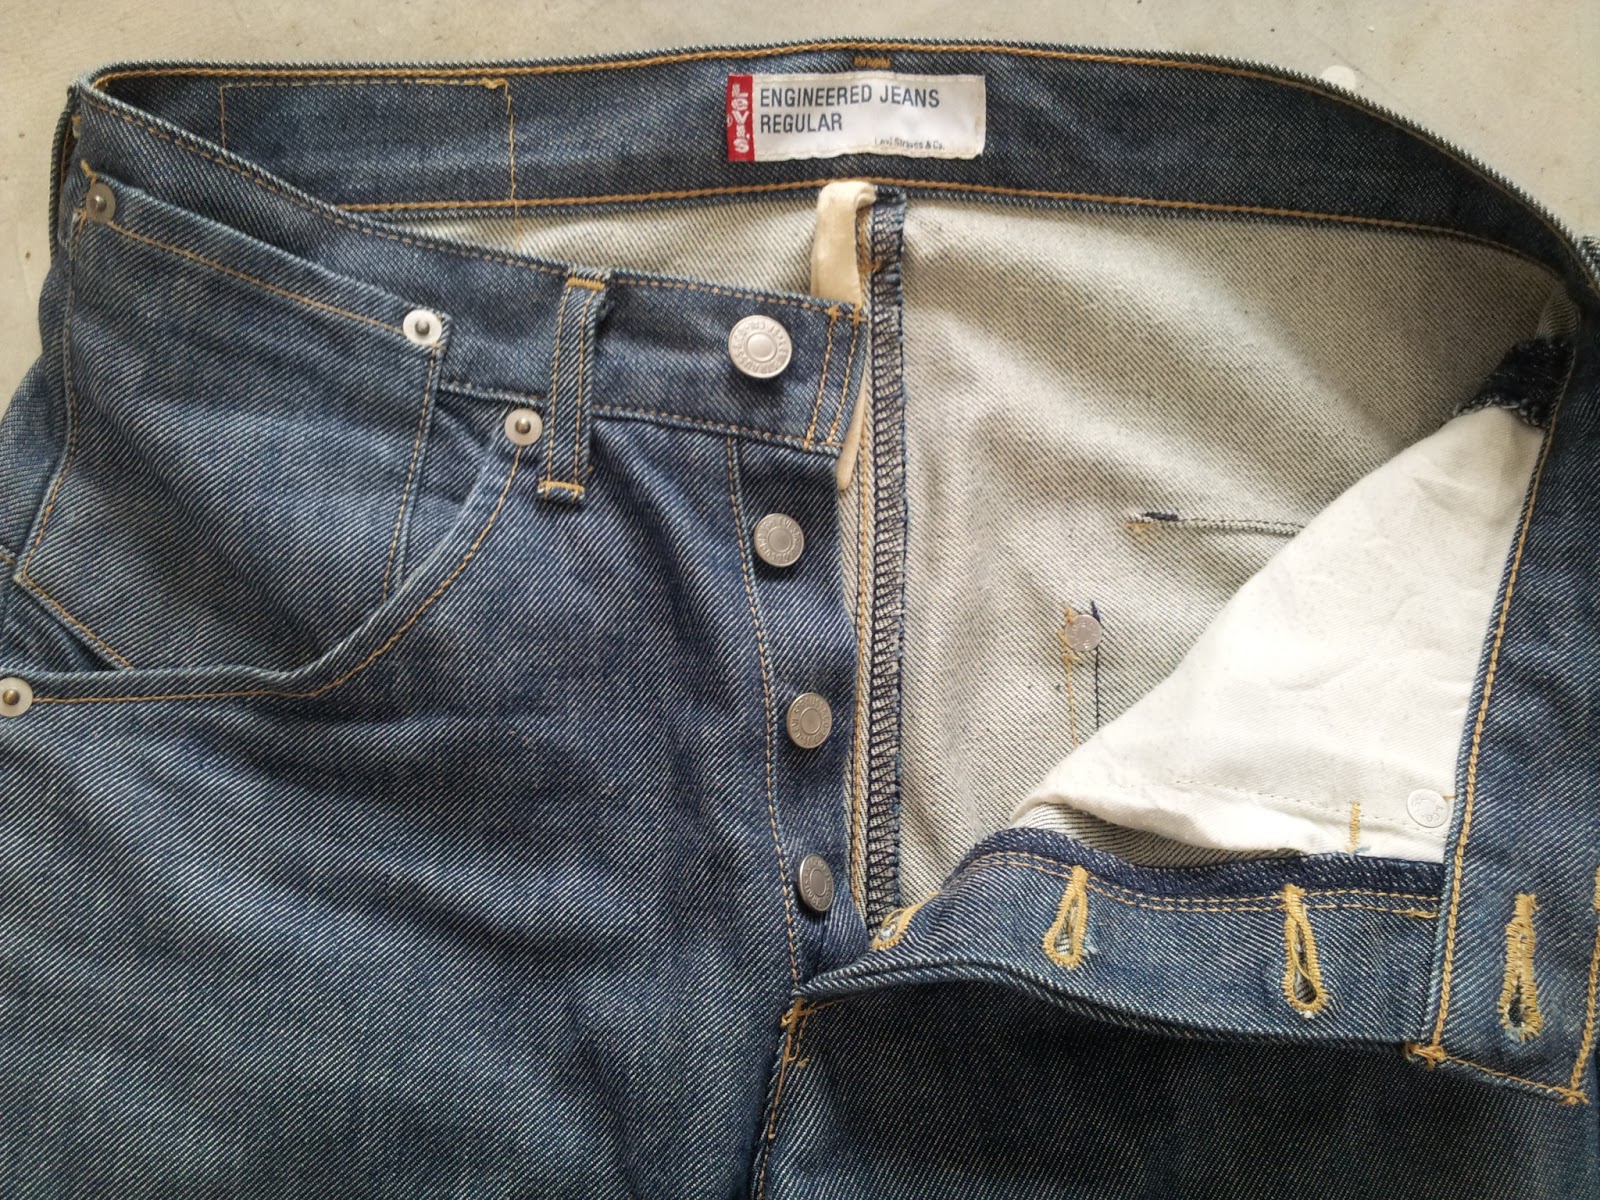 pArT tiMe bUnDLe: Levi's Engineered Jeans (SOLD)